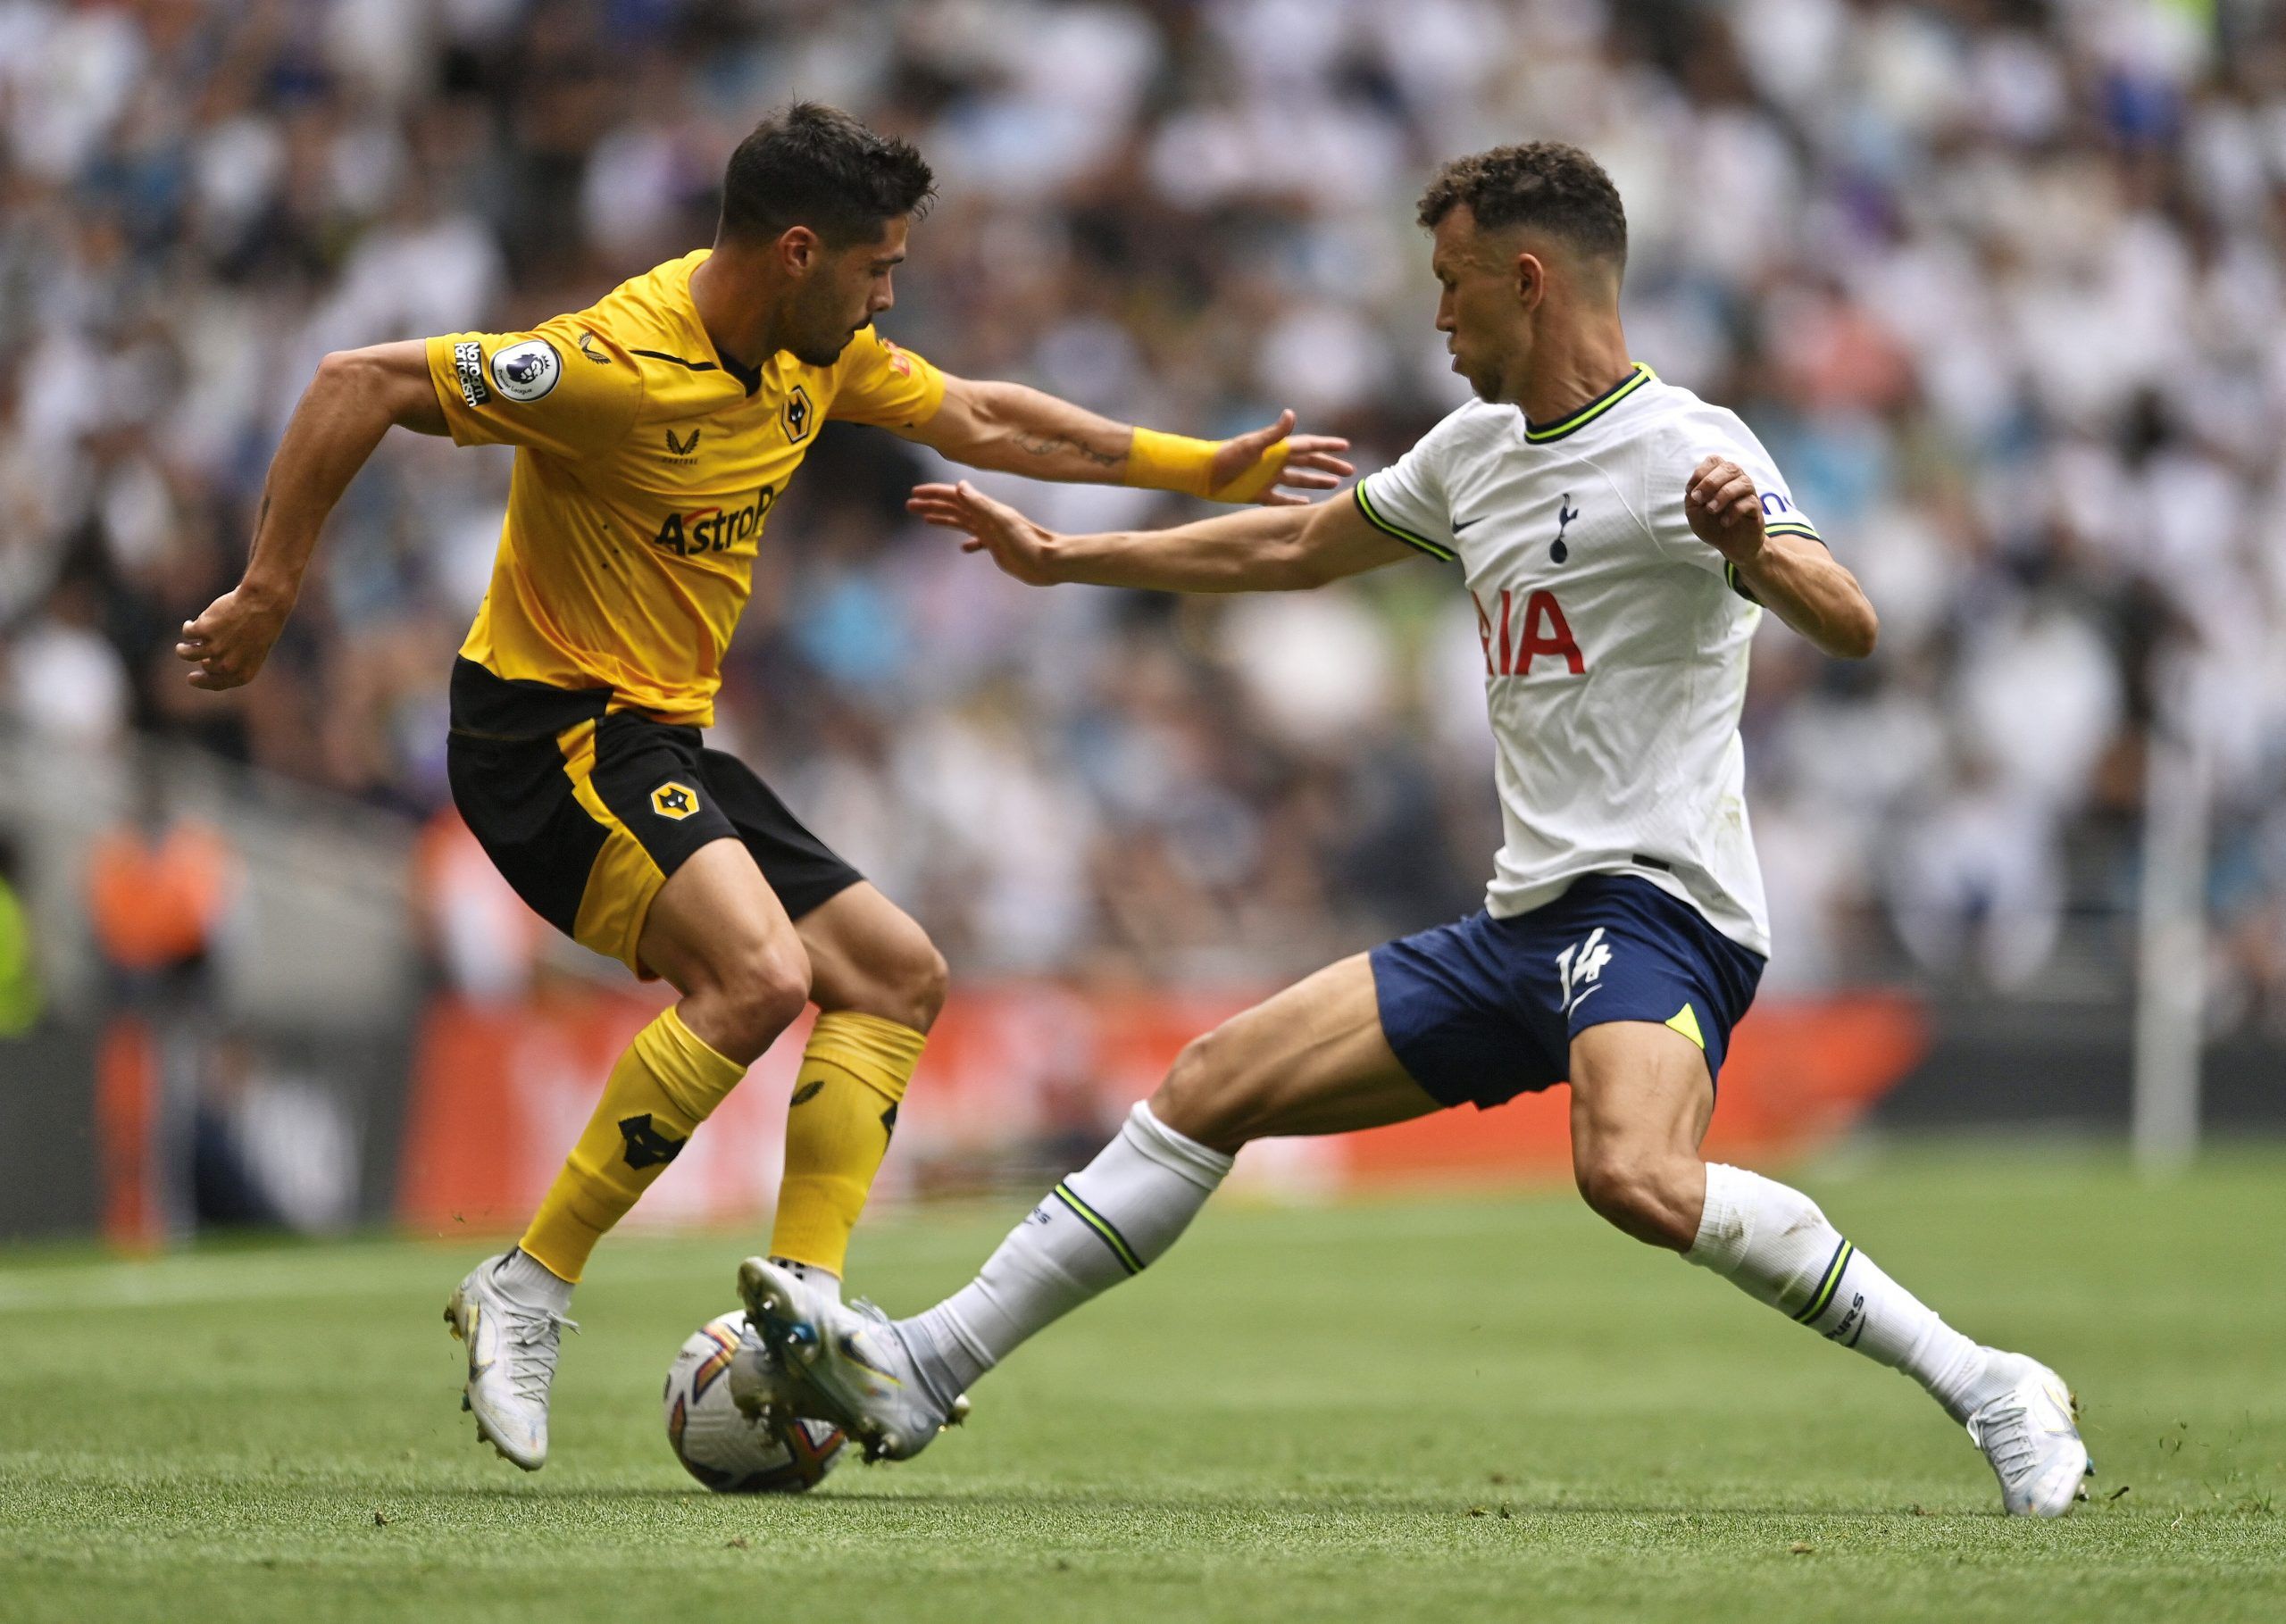 Wolves: Pedro Neto struck by ‘terrible’ injury blow -Wolves News